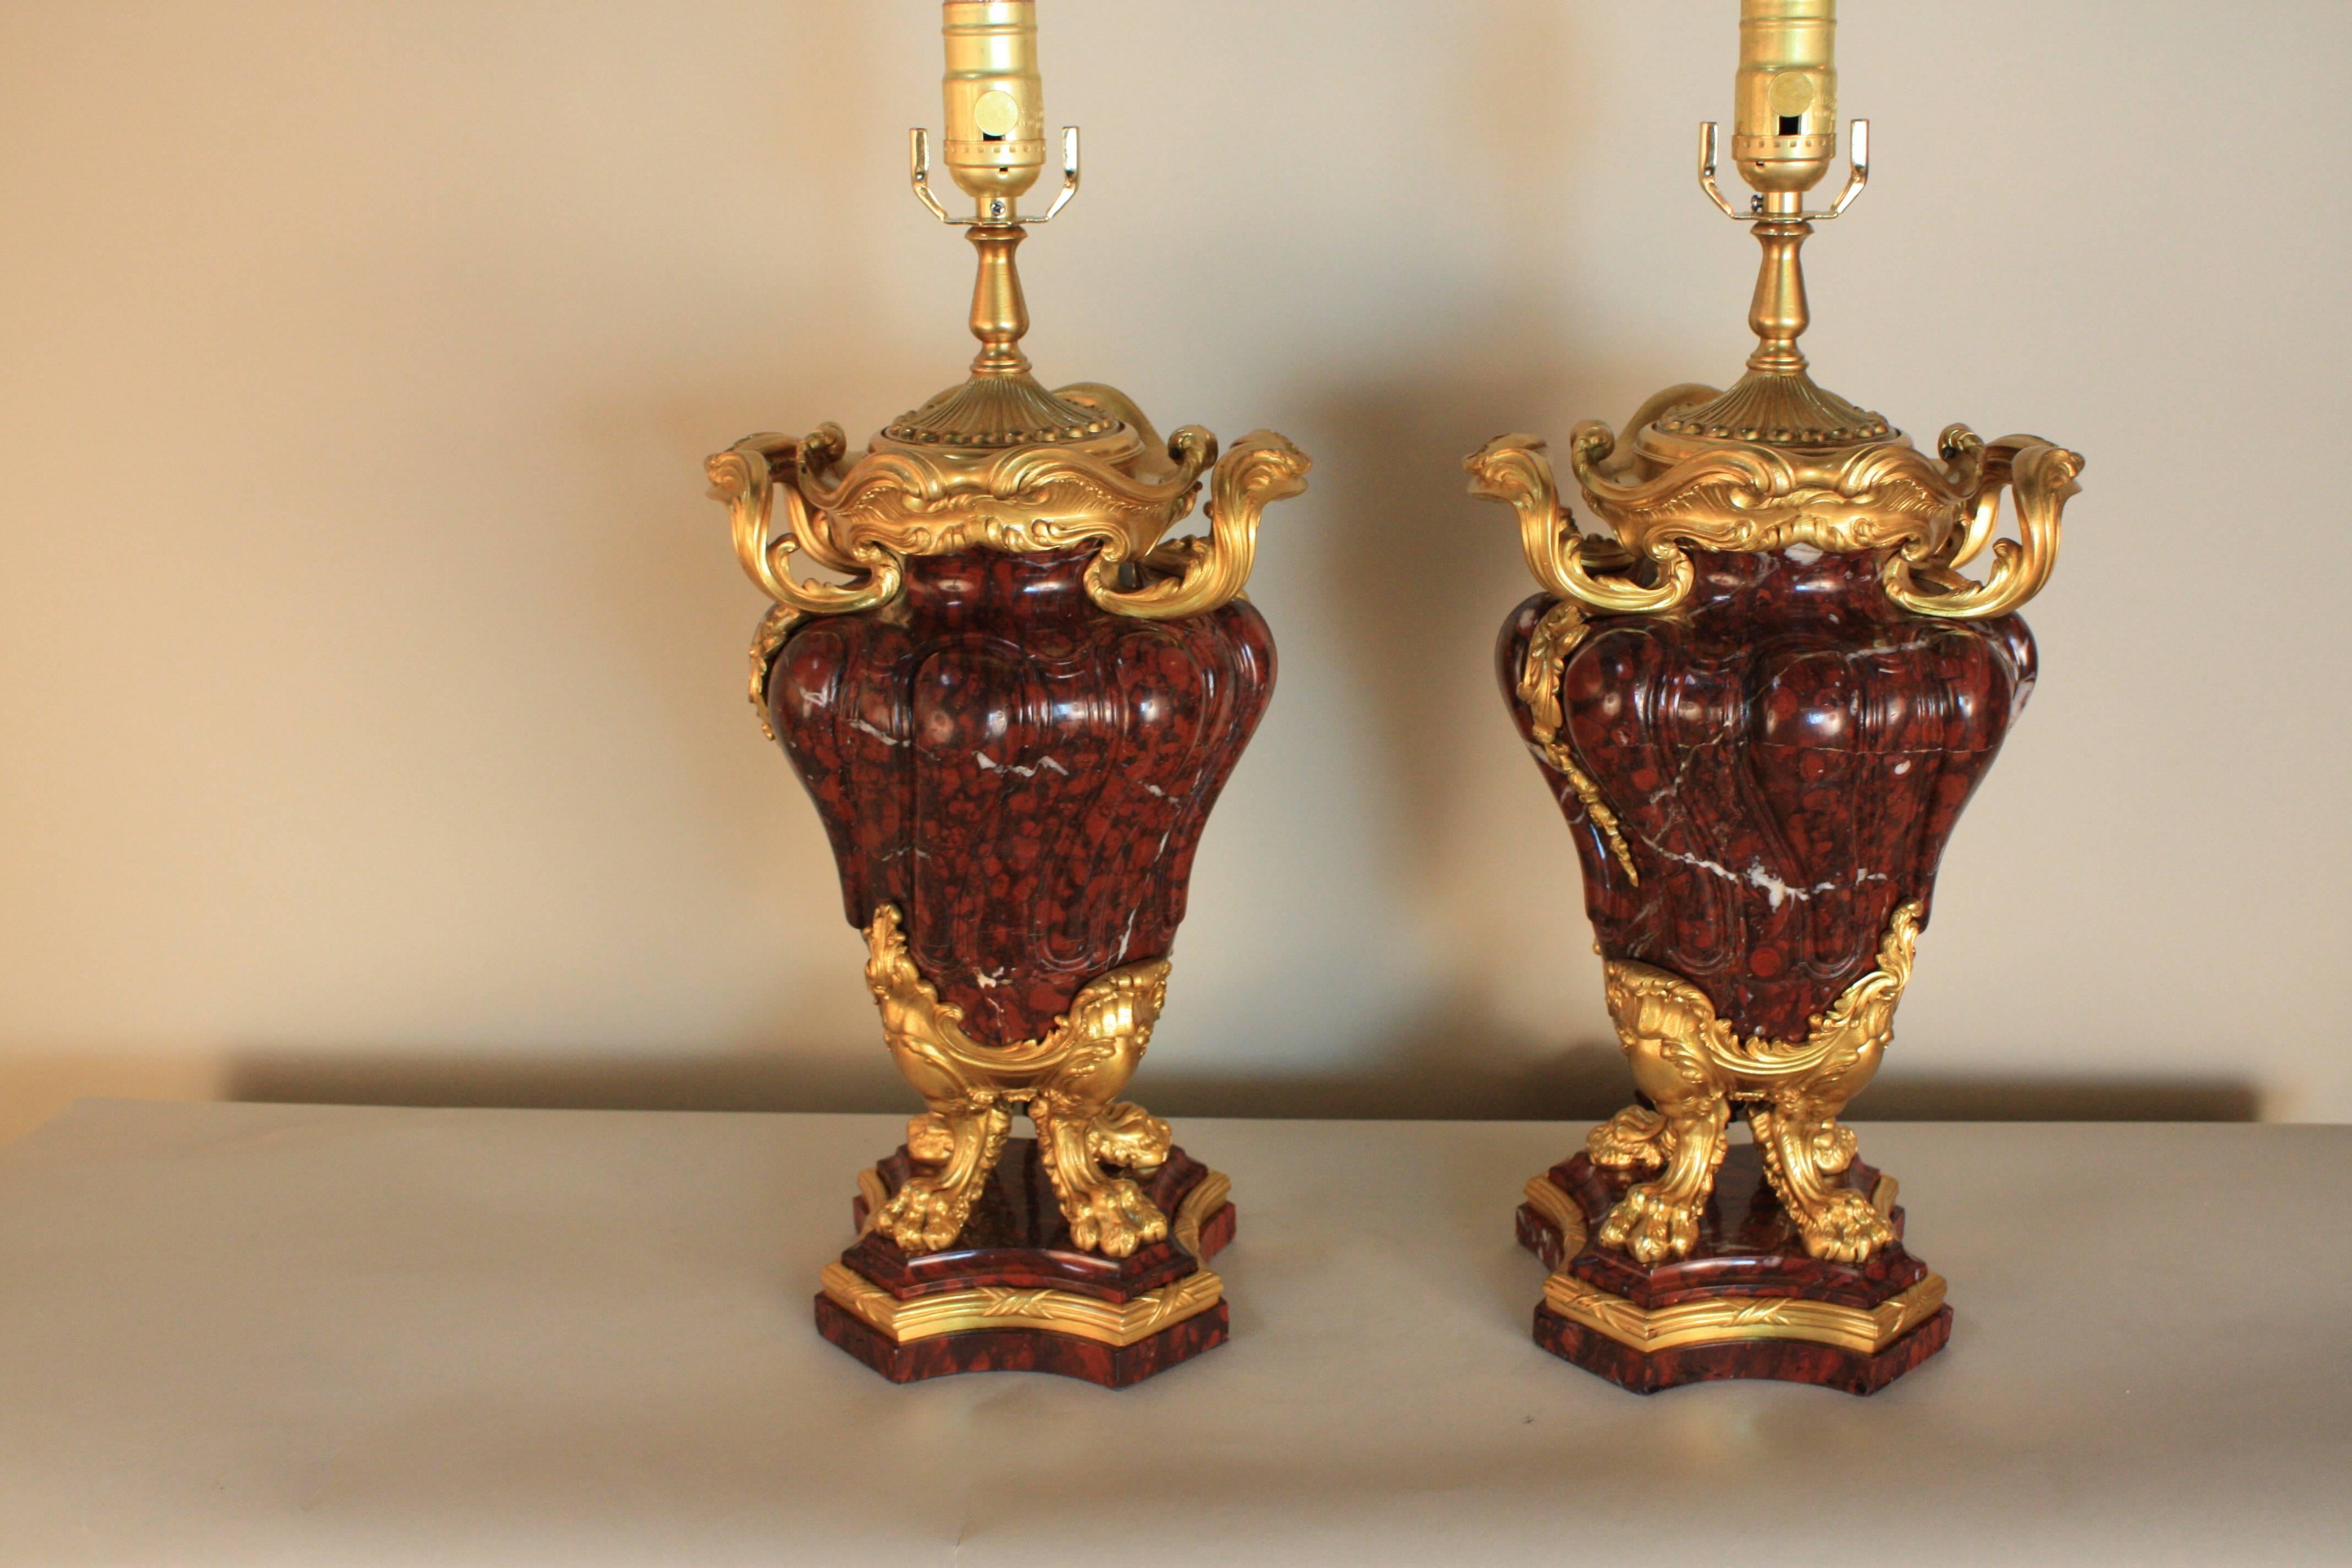 Pair of French of gilt bronze and rouge marble urns, circa late 19 century that professionally mounted as table lamps.